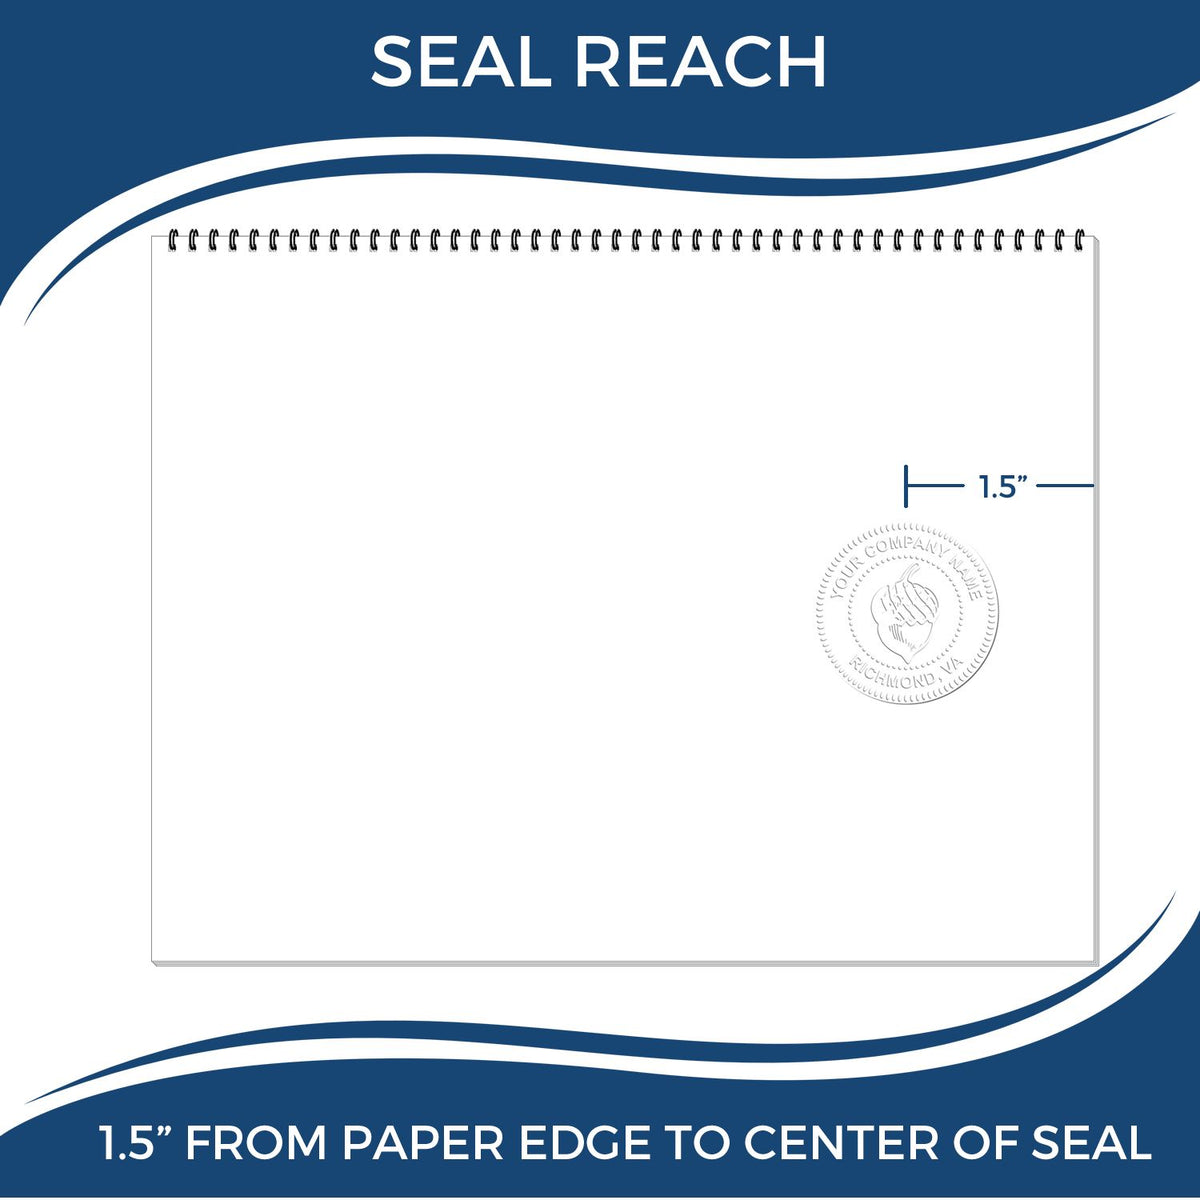 An infographic showing the seal reach which is represented by a ruler and a miniature seal image of the Soft Maine Professional Engineer Seal